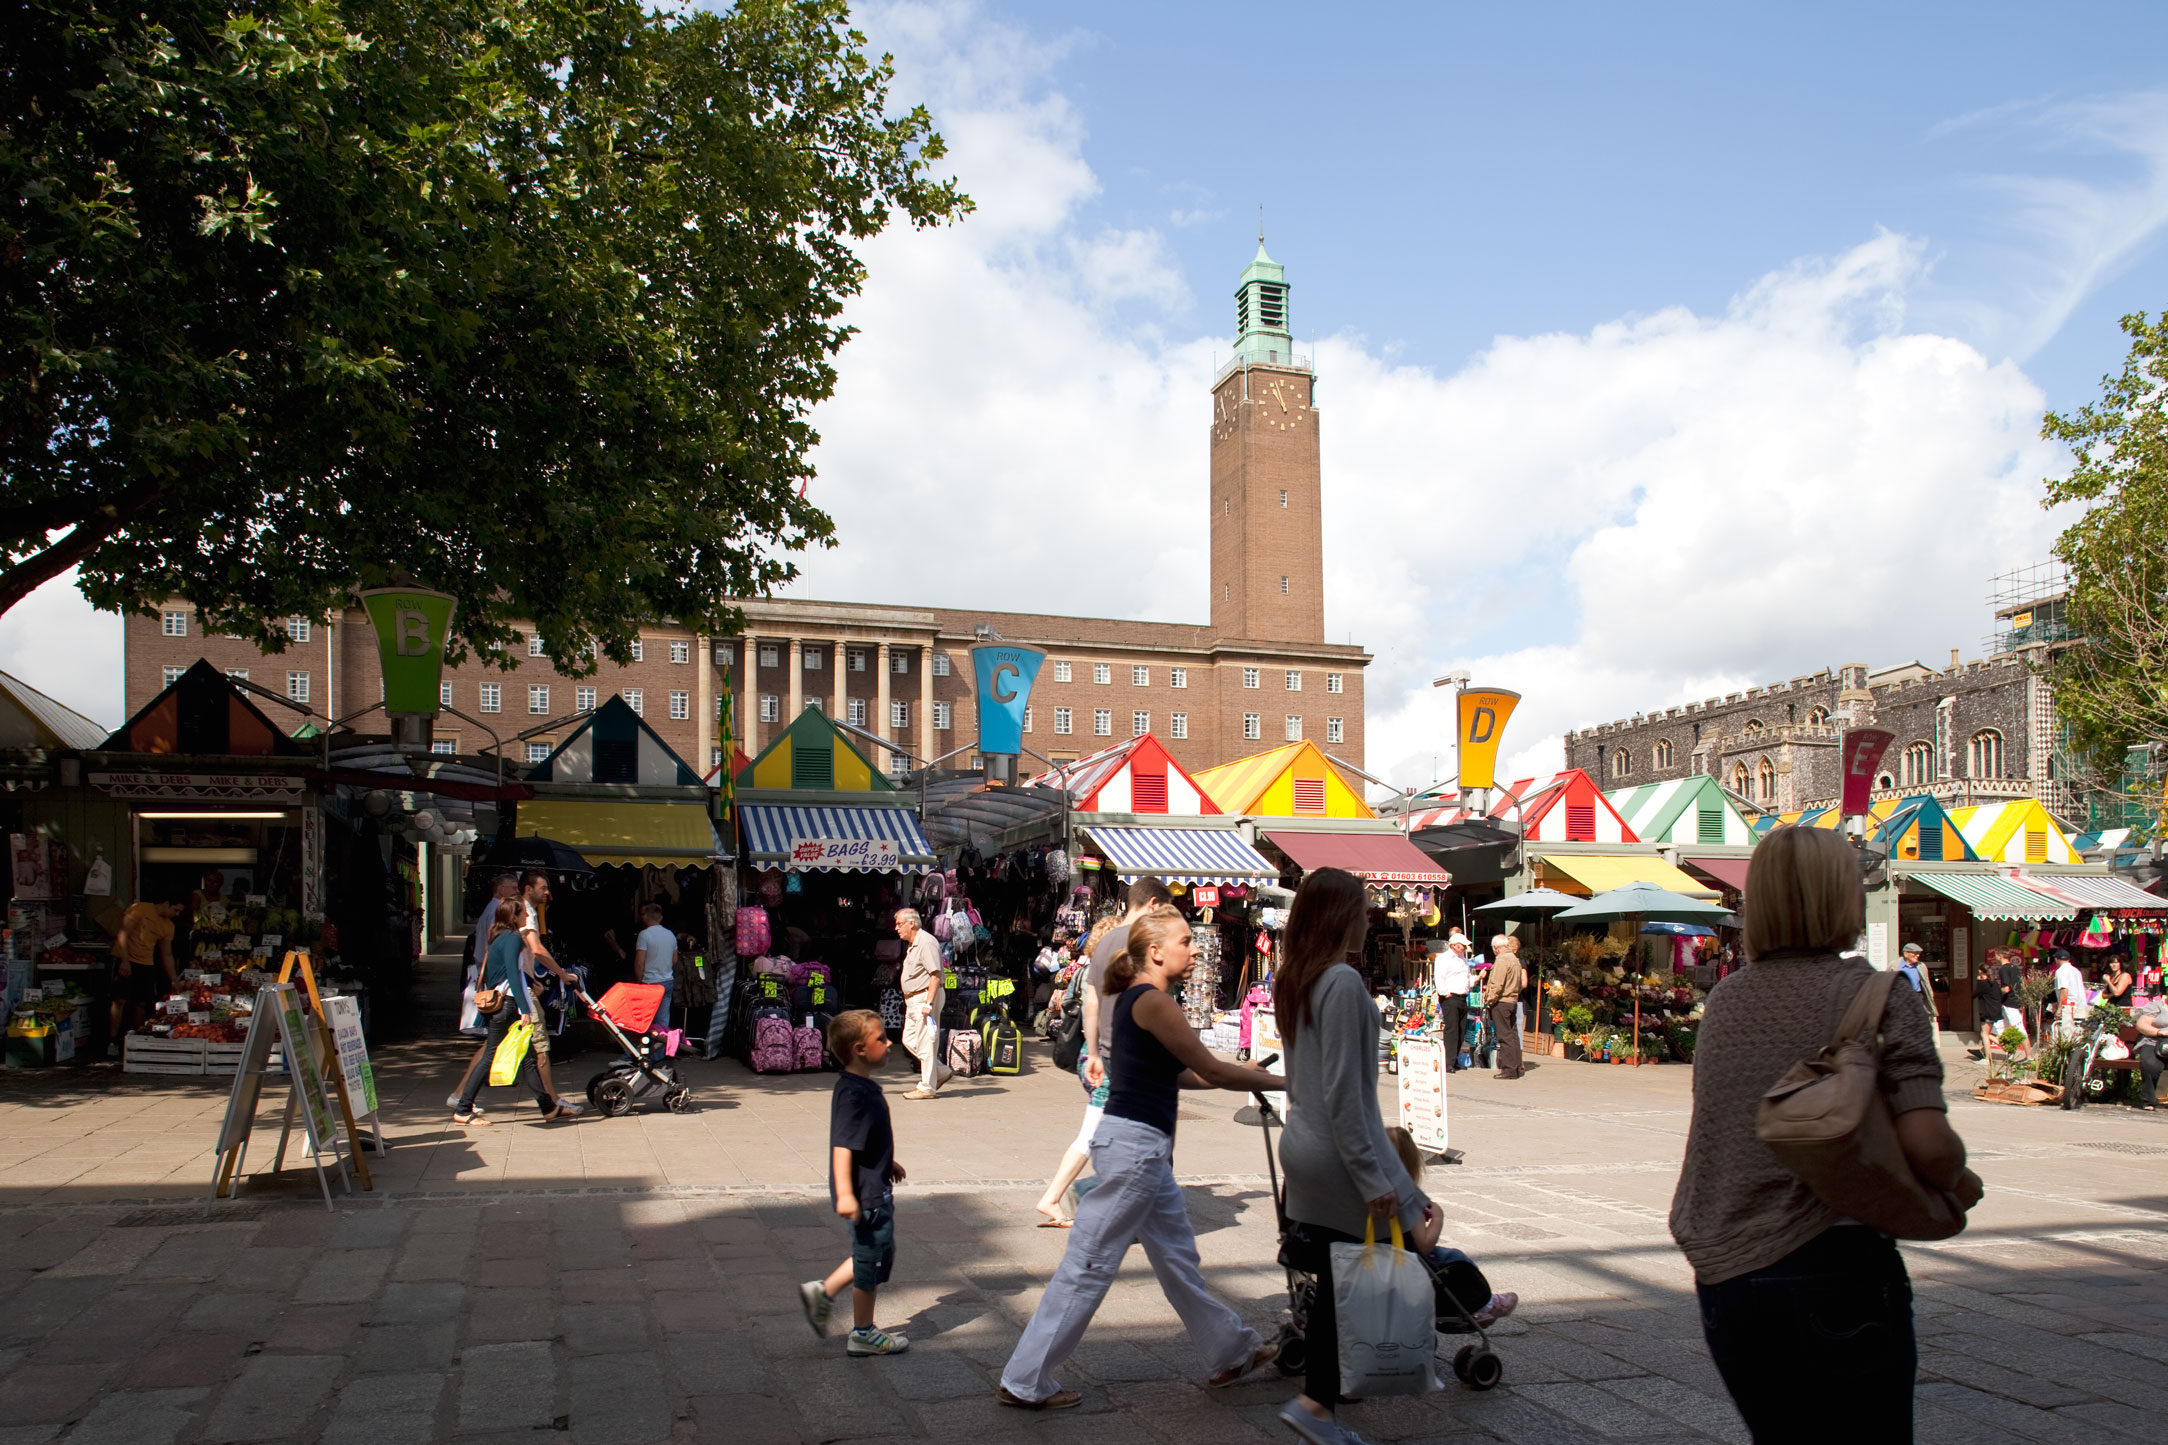 People around market stalls with a large civic building in the background.